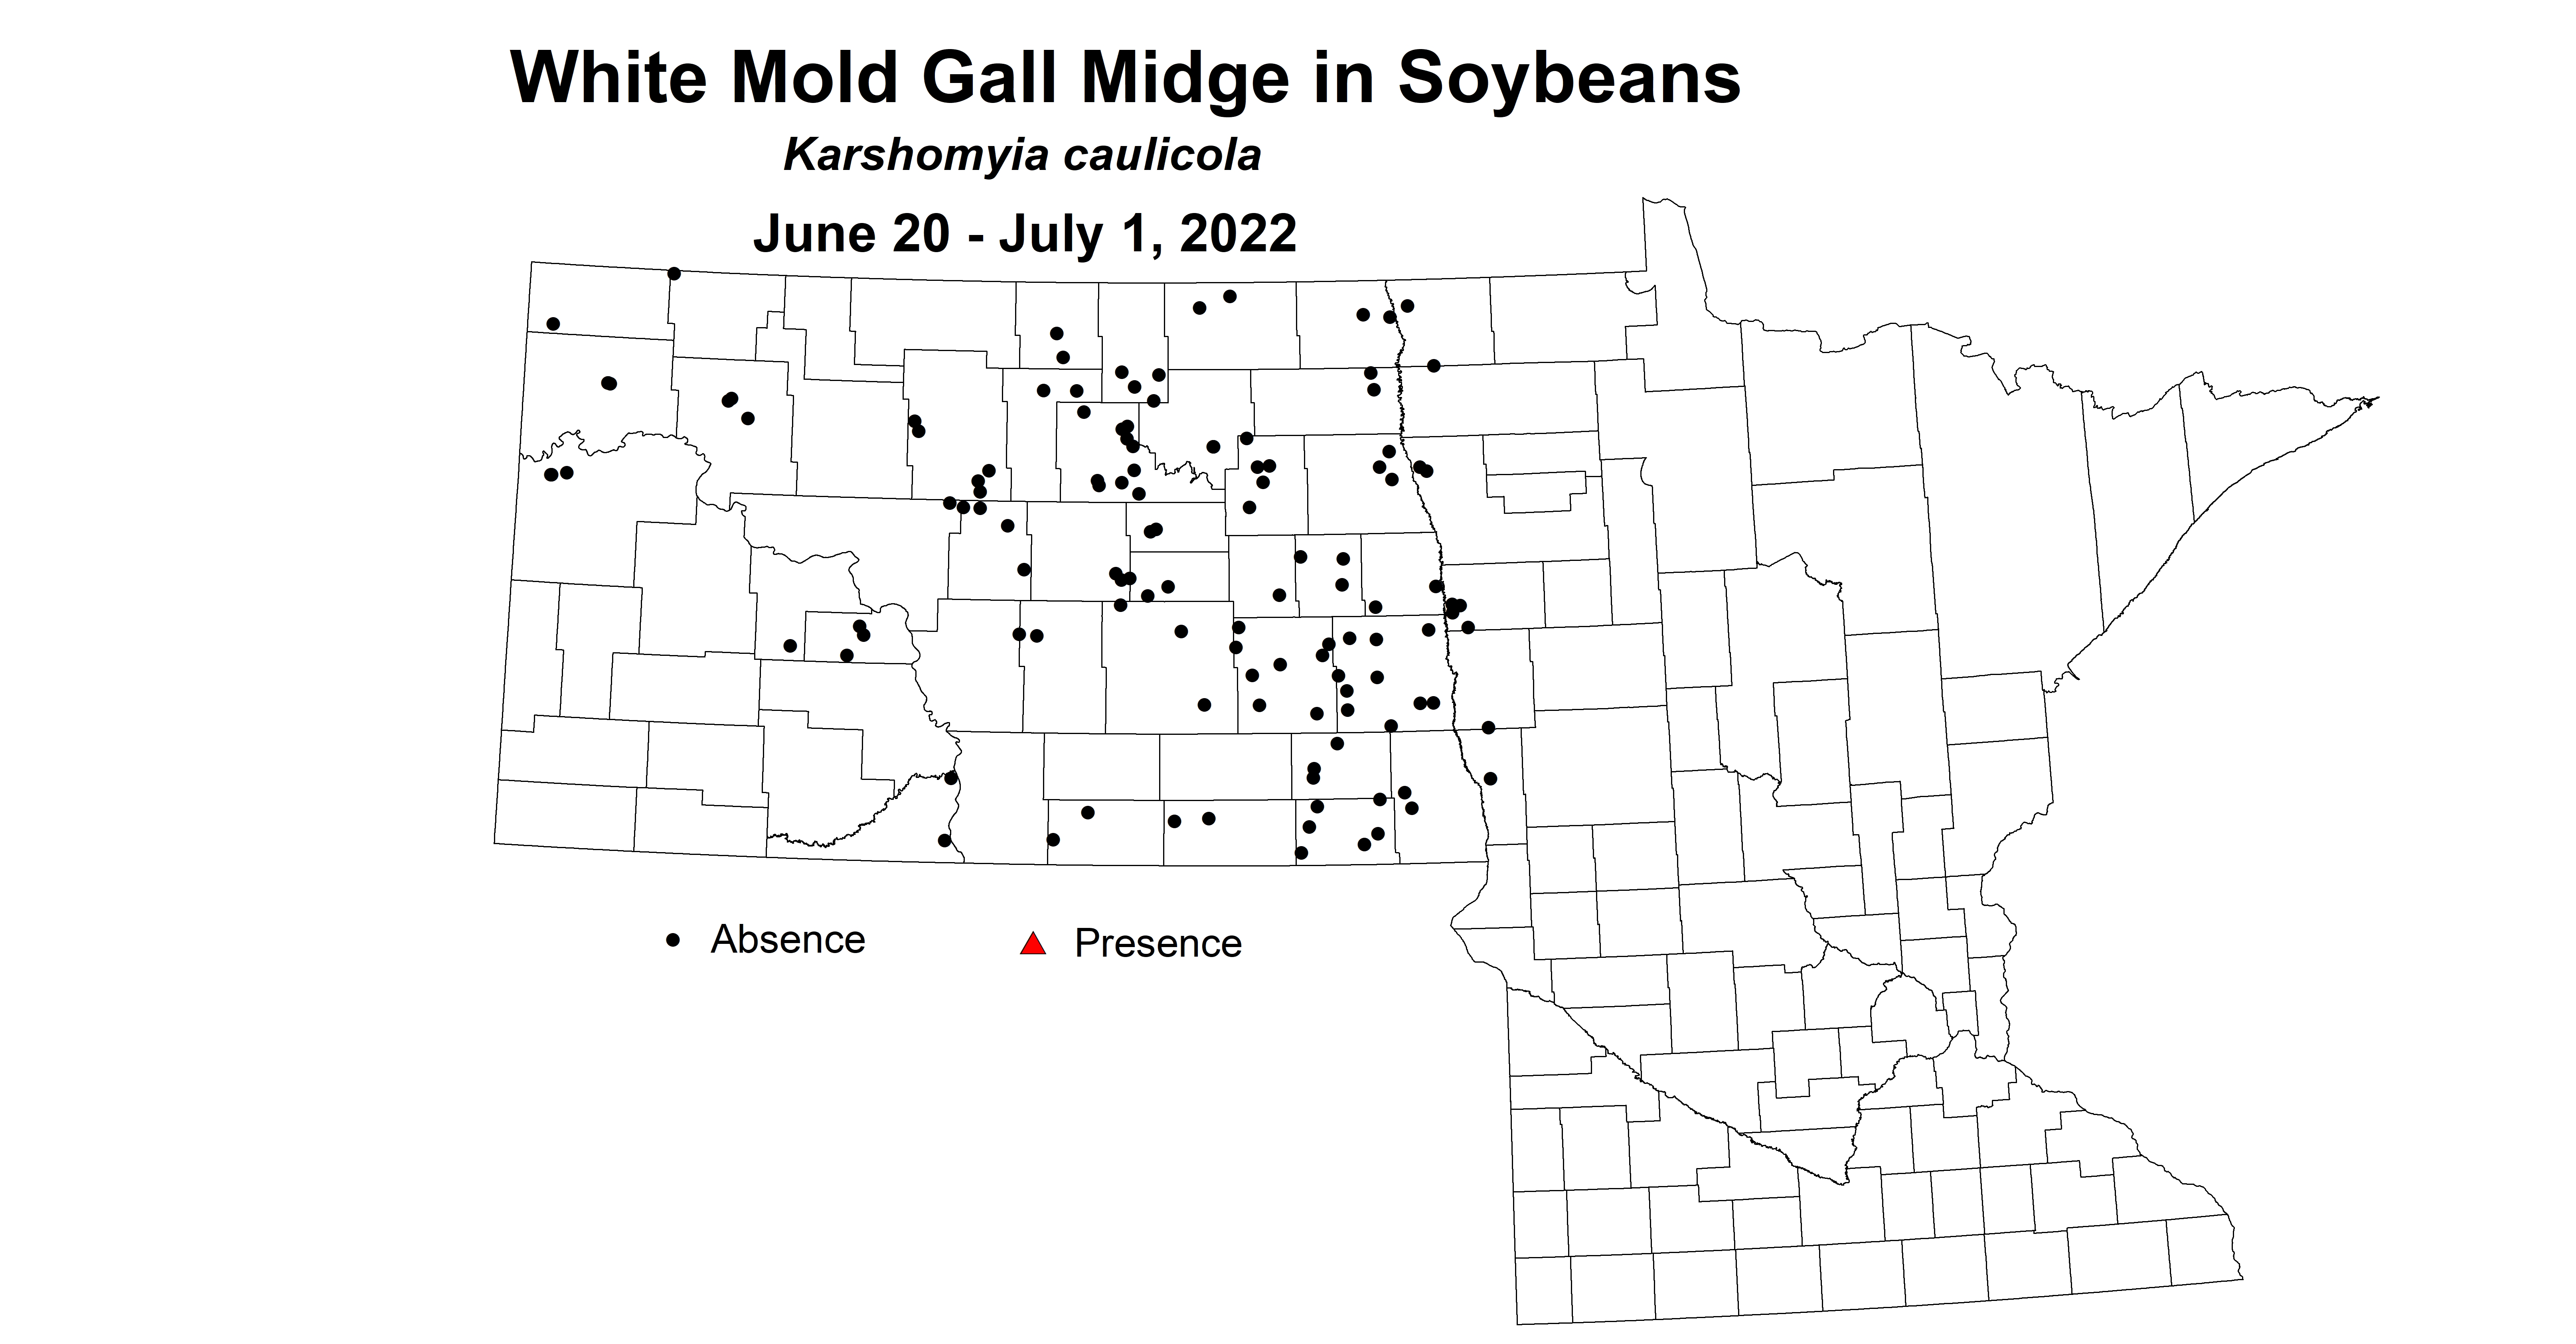 ND IPM map of soybean presence of white mold gall midge June 20 - July 1 2022